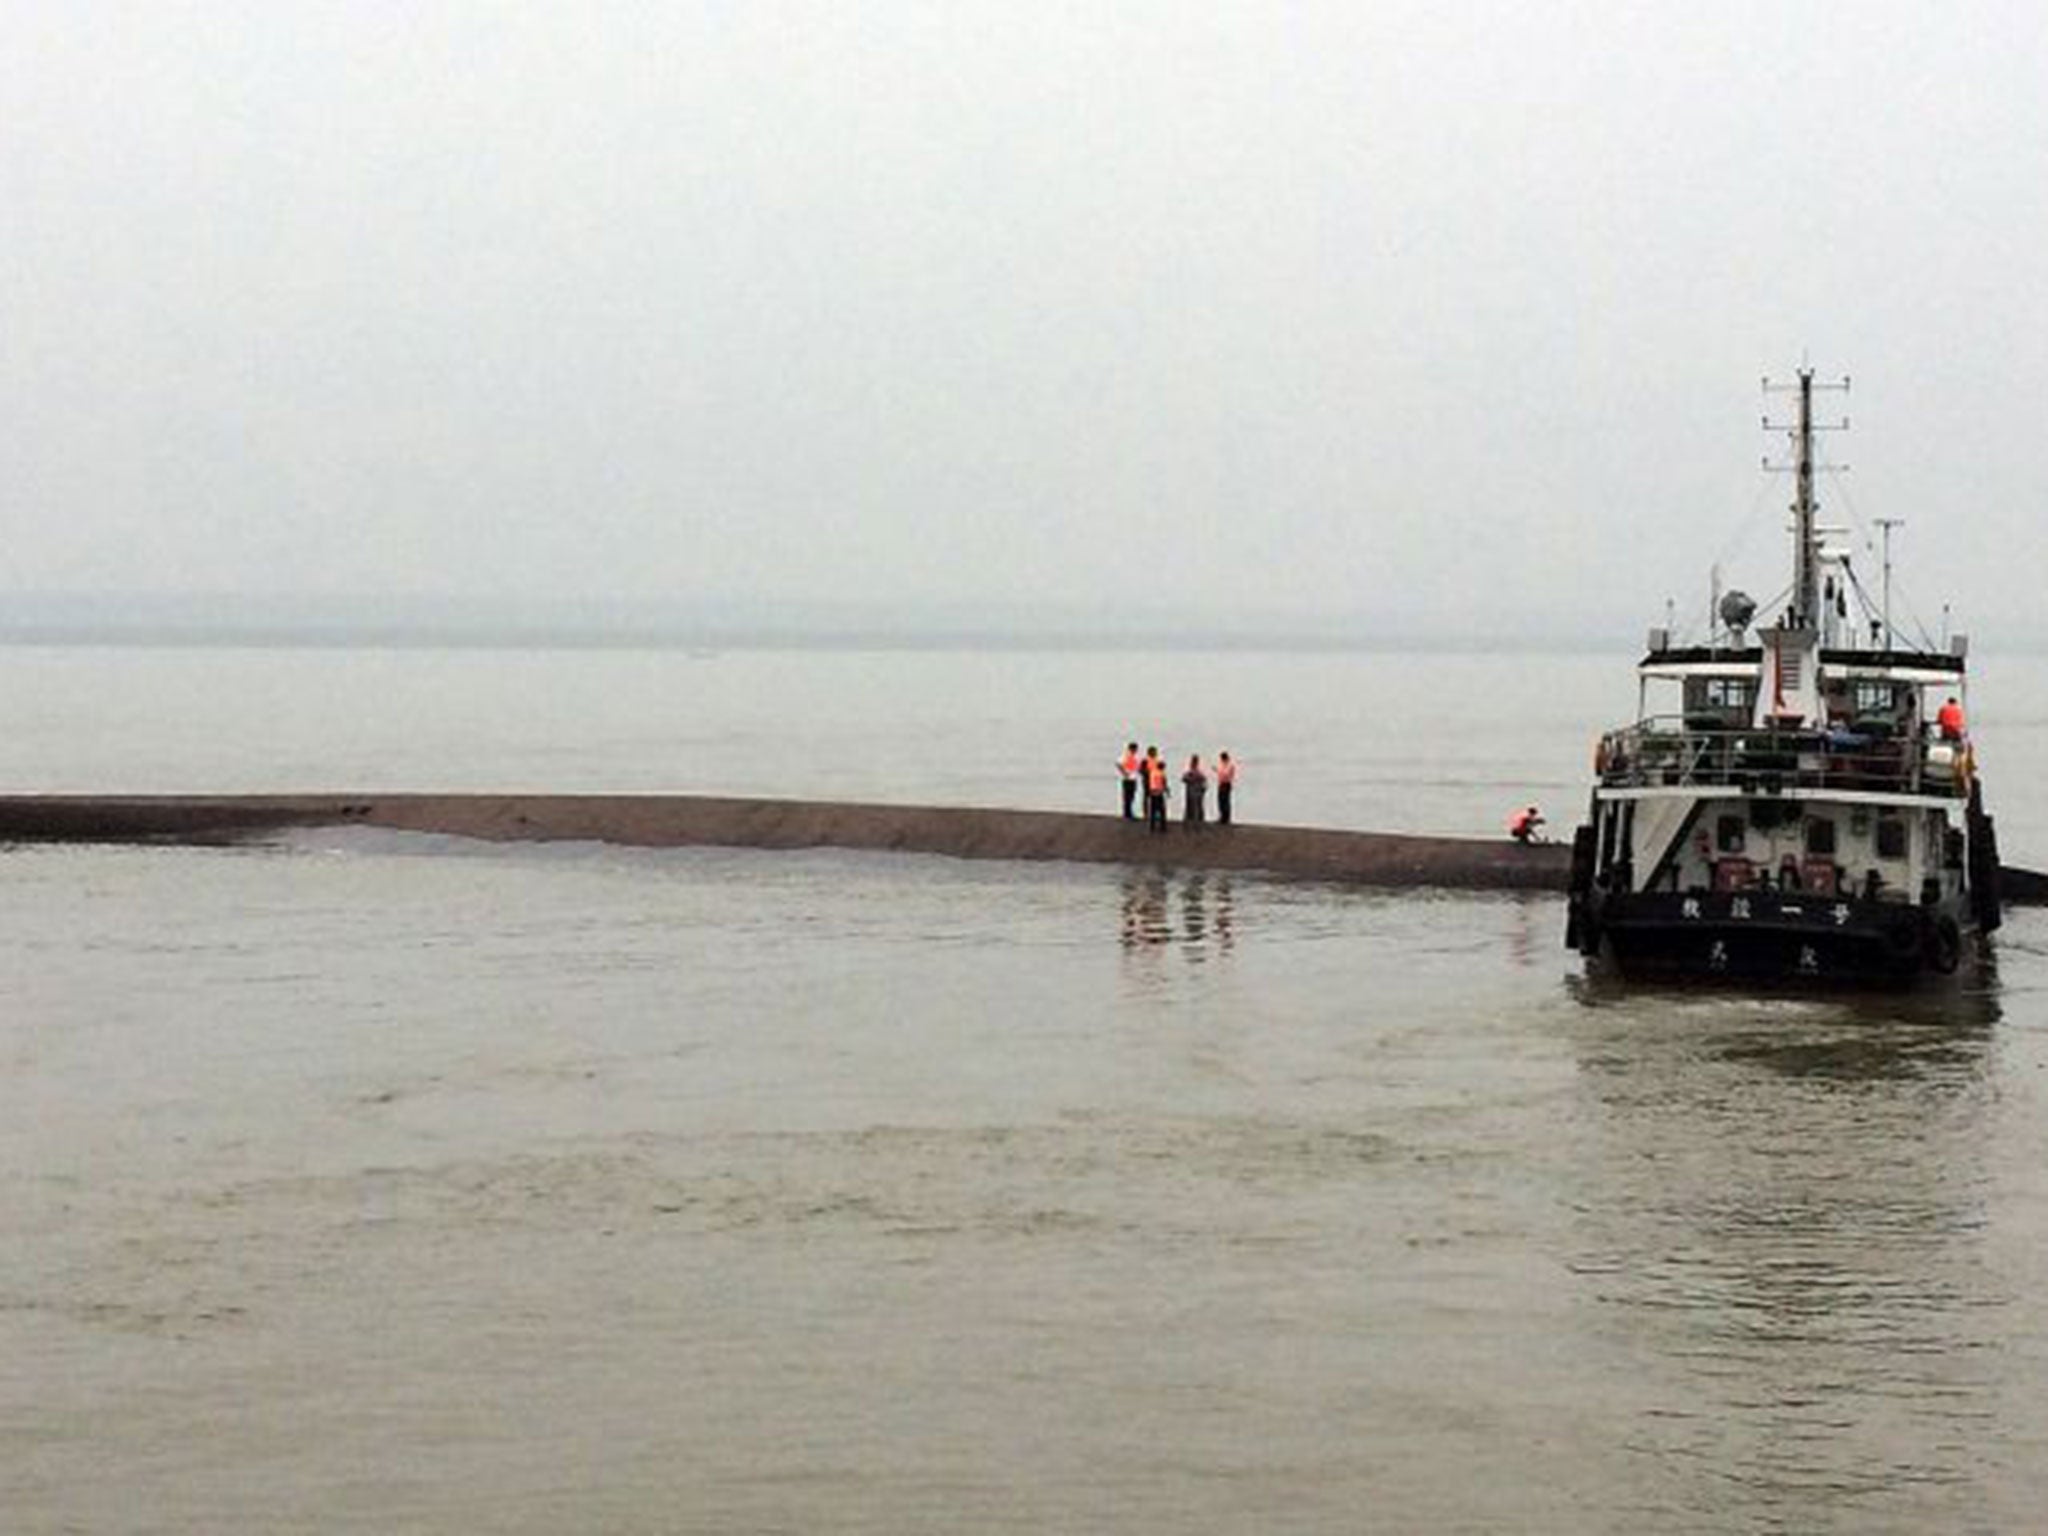 A Chinese rescue boat is seen alongside a capsized passenger ship carrying more than 450 people which sunk in the Yangtze river, triggering a rescue effort hampered by strong winds and heavy rain